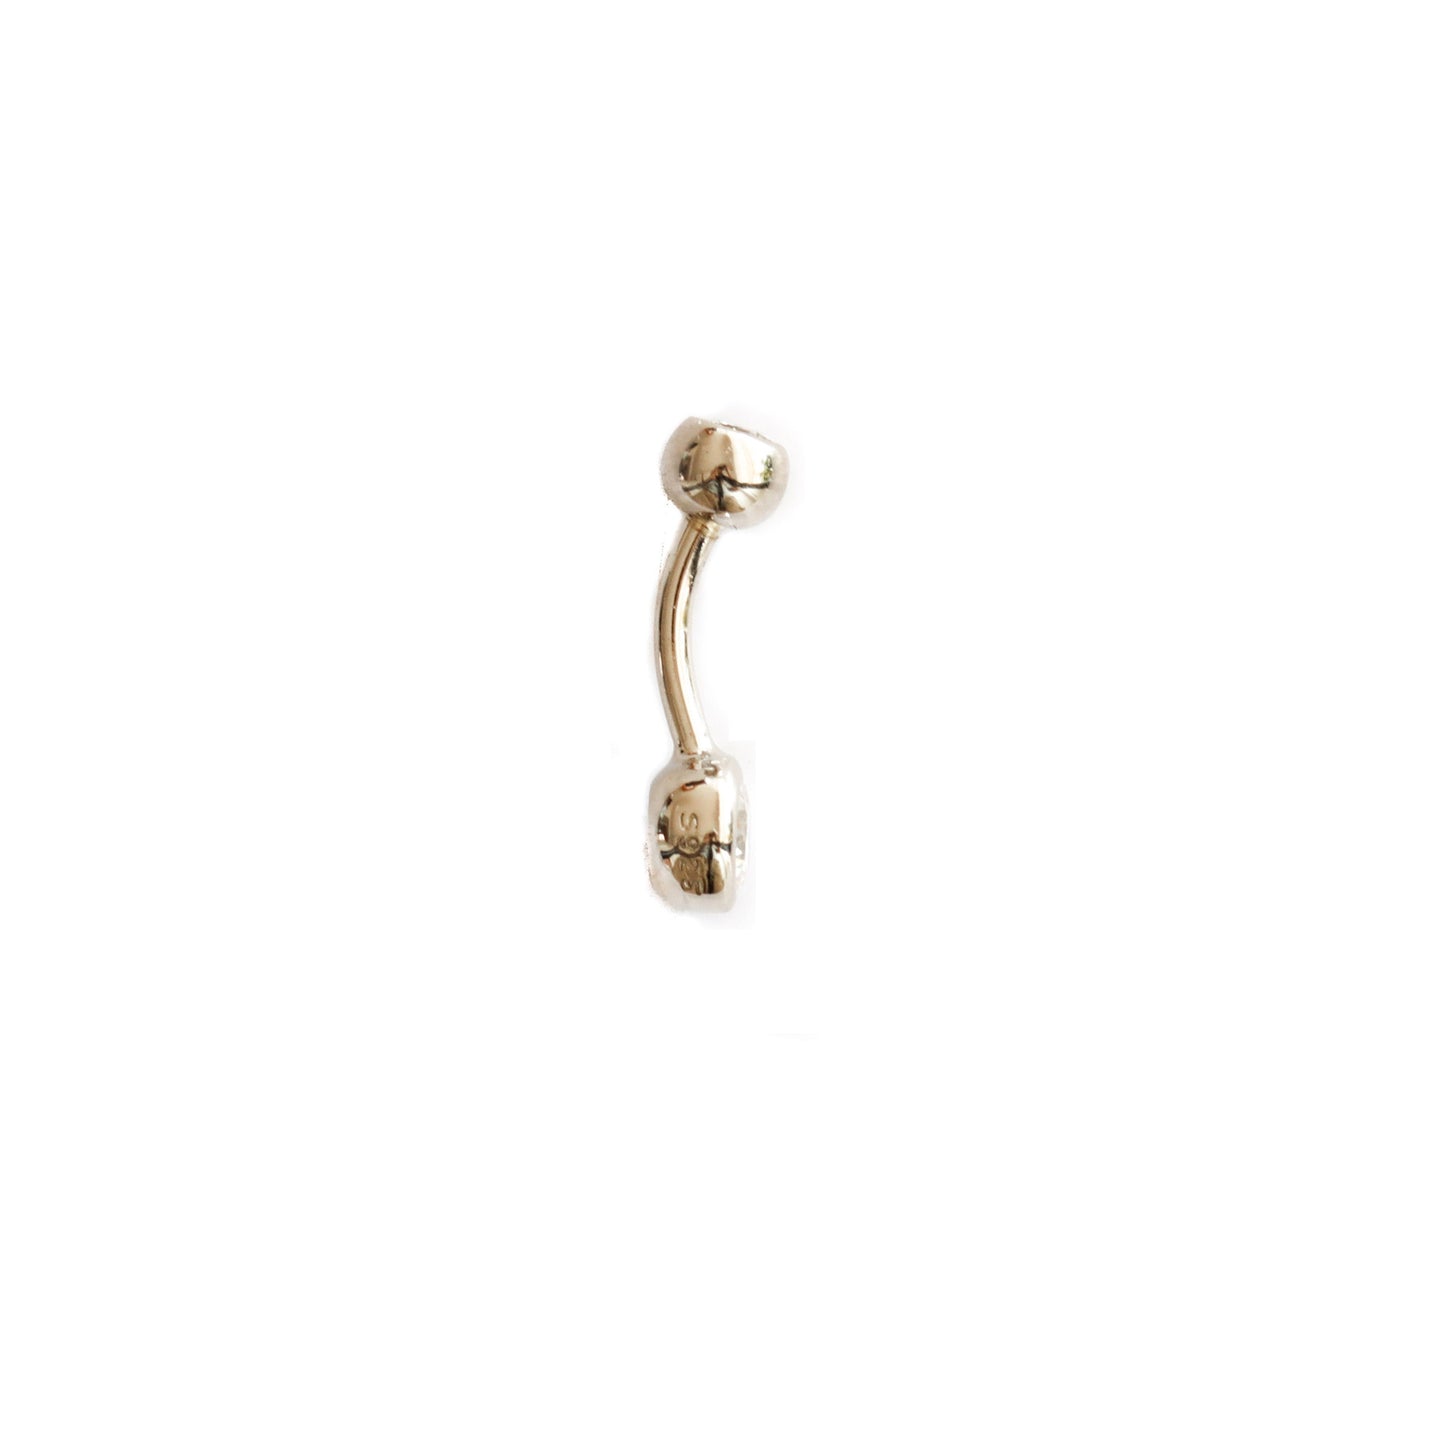 Solid 925 Silver | Small Belly Ring with Sparkling Cubic Zirconia Crystals | 6mm 1/4" 8mm 5/16" 10mm 3/8" - Sturdy South